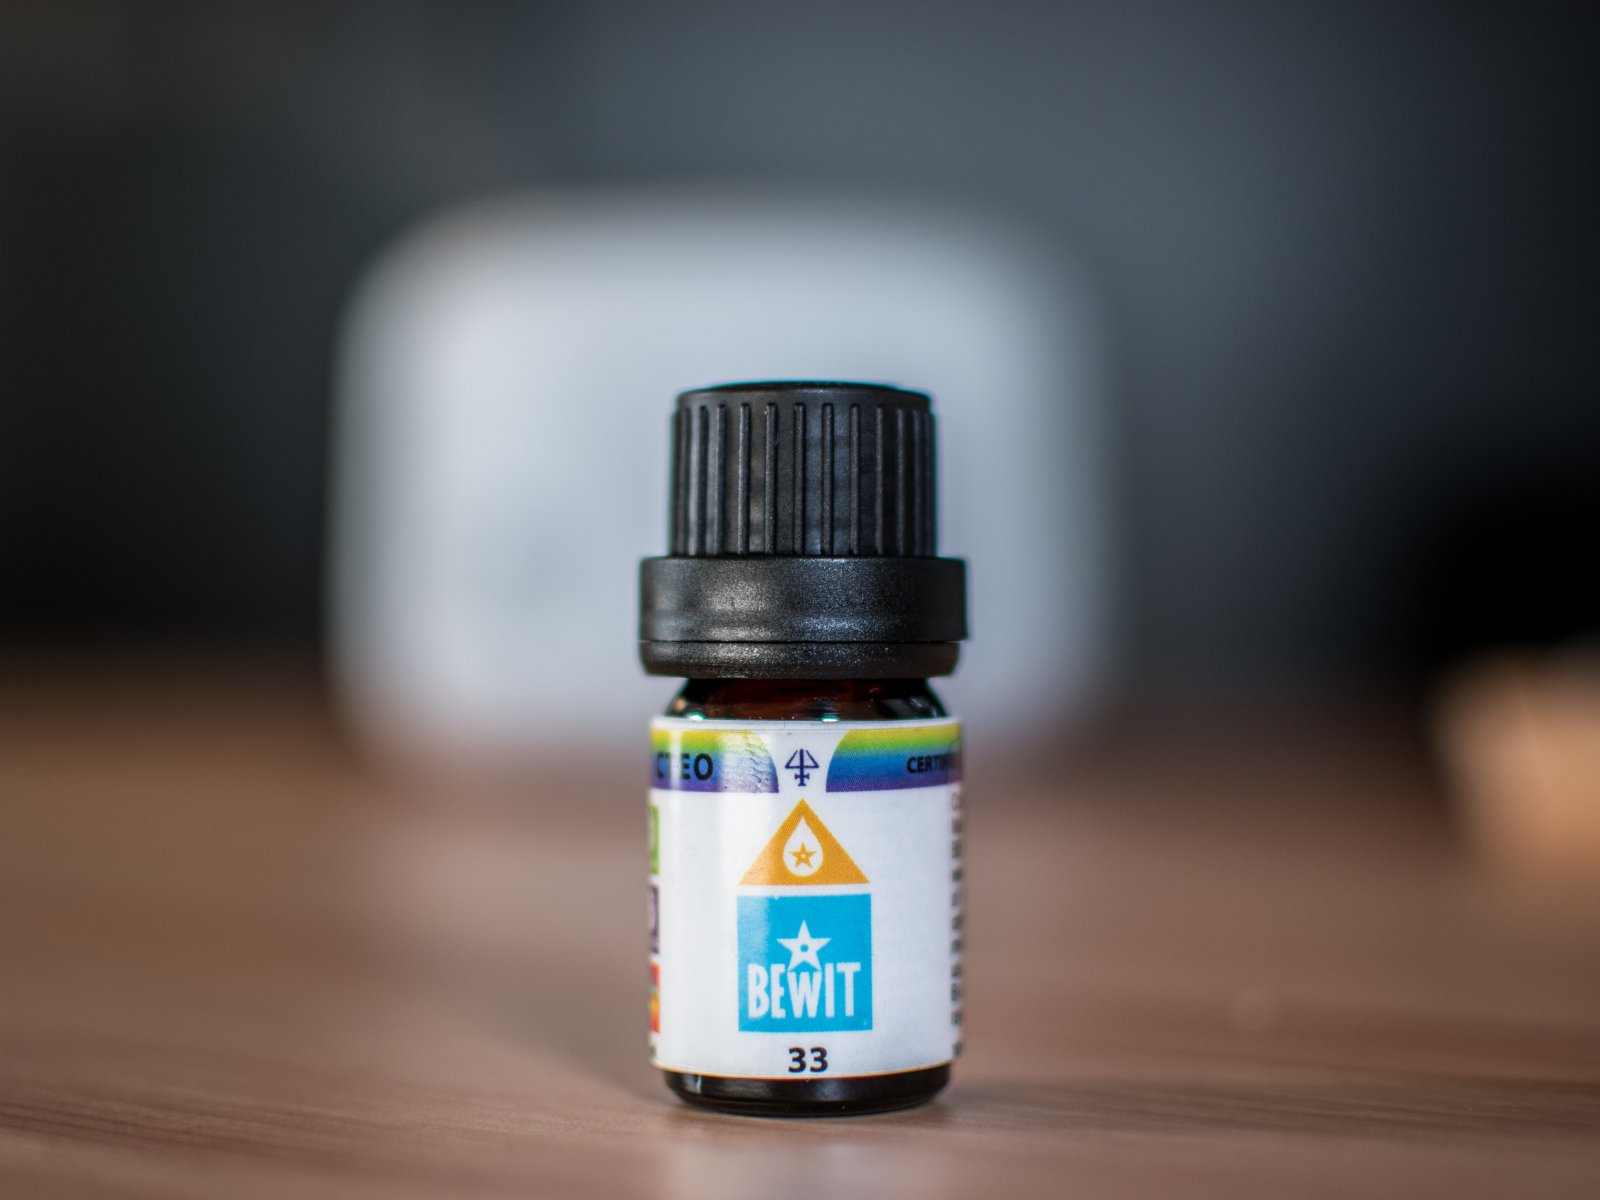 Aroma diffuser FAVORIT + essential oil blend BEWIT 33, 5 ml -  - 3